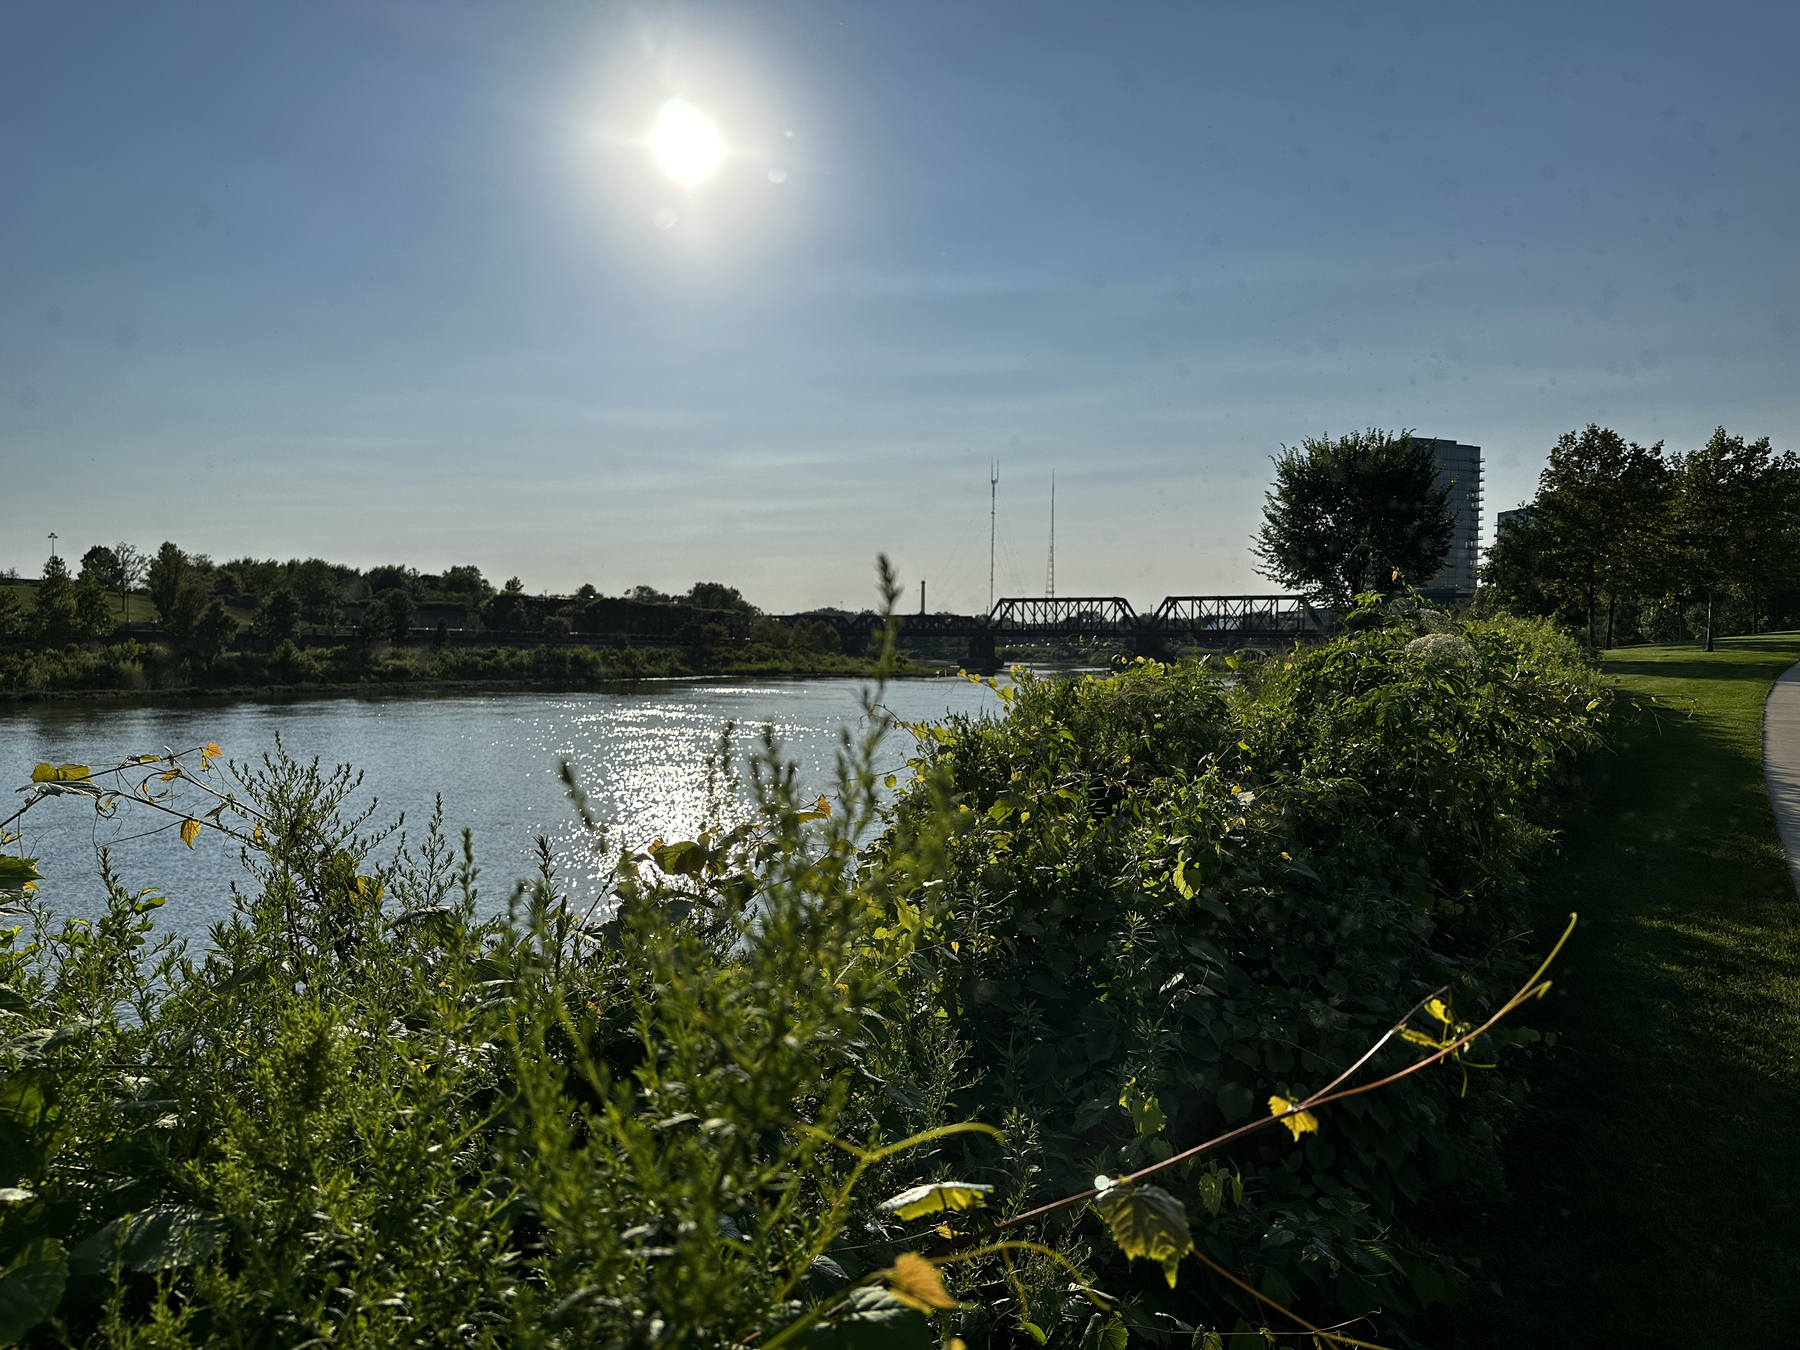 Green bushes in the foreground with the river and an old industrial style bridge in the background with a bright sun